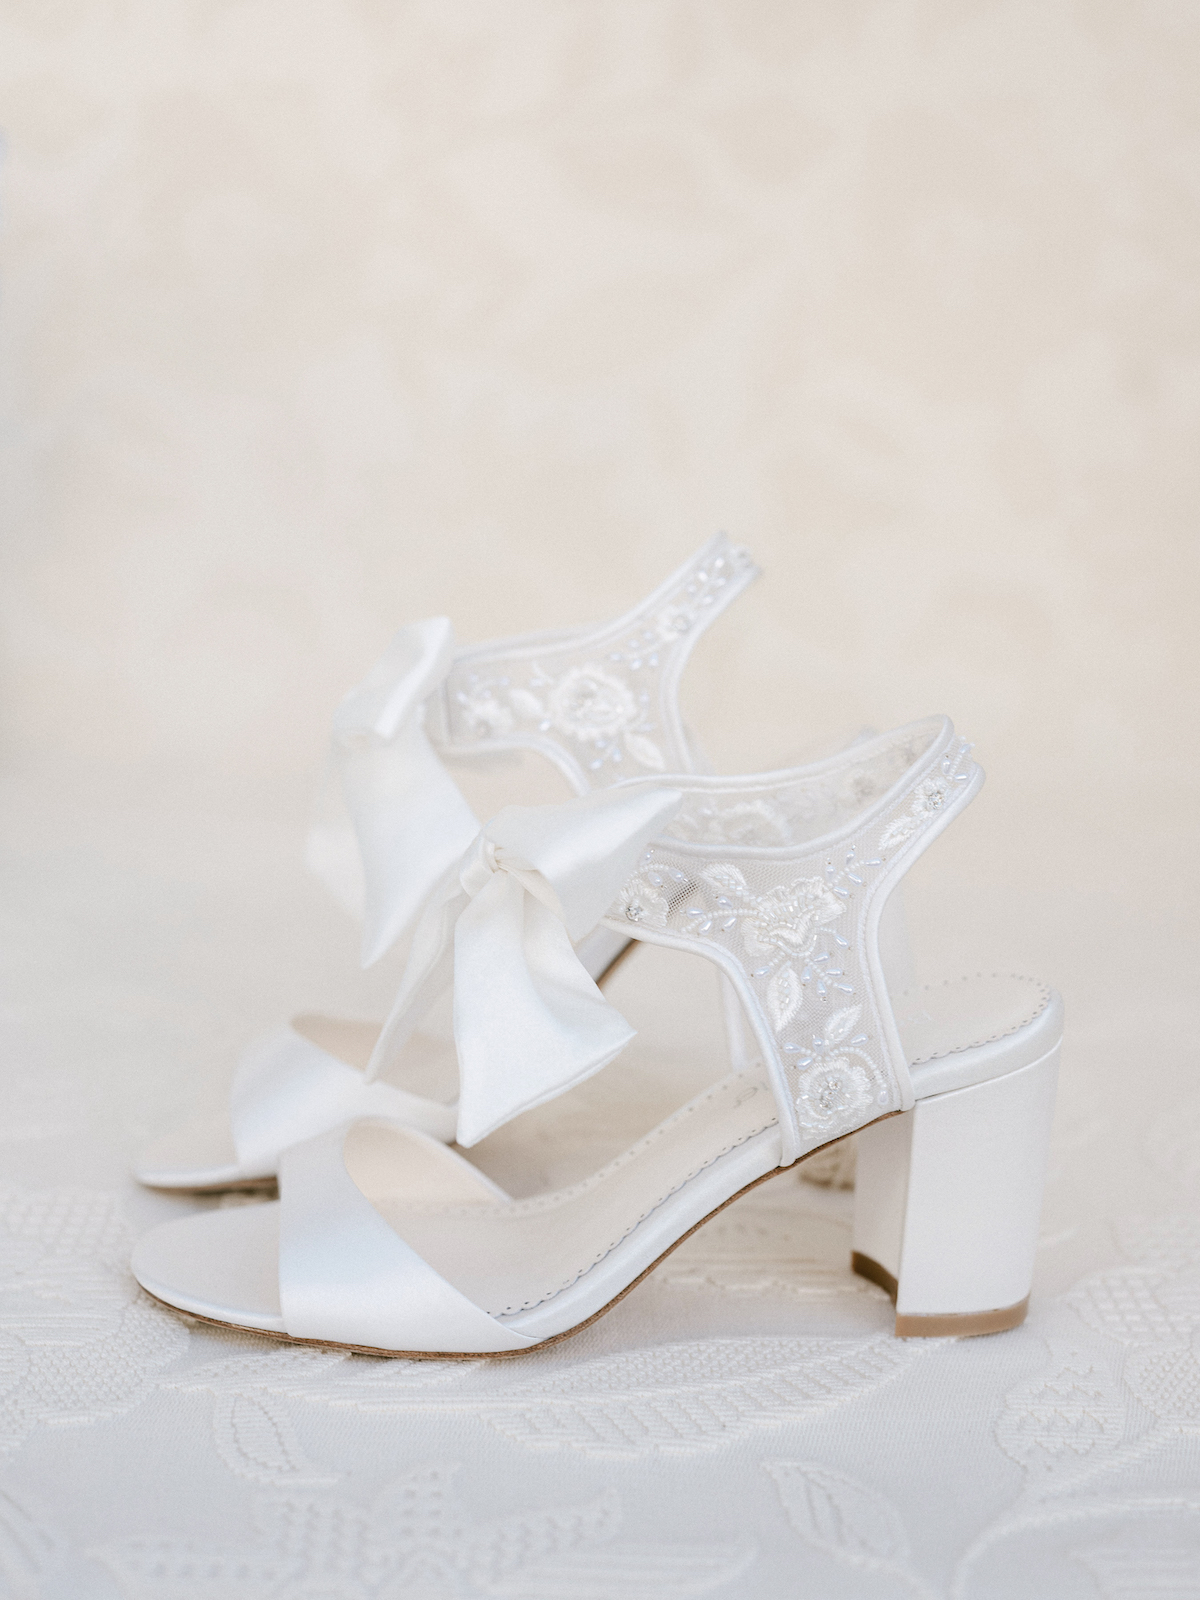 The Metamorphosis Collection - divine wedding shoes from Bella Belle ...